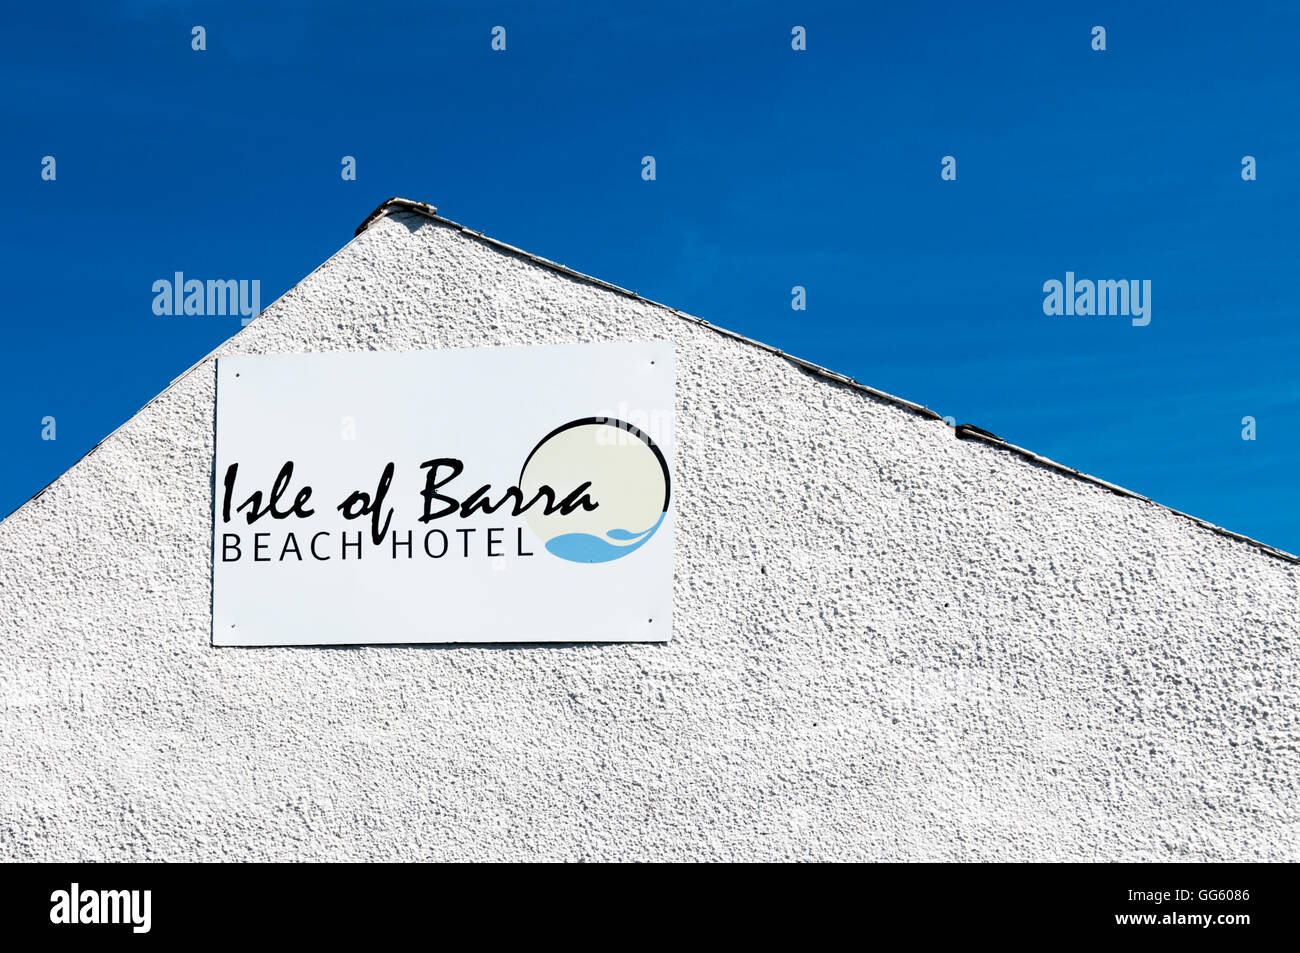 Sign for The Isle of Barra Beach Hotel on Bàgh Halaman on the island of Barra in the Outer Hebrides. Stock Photo